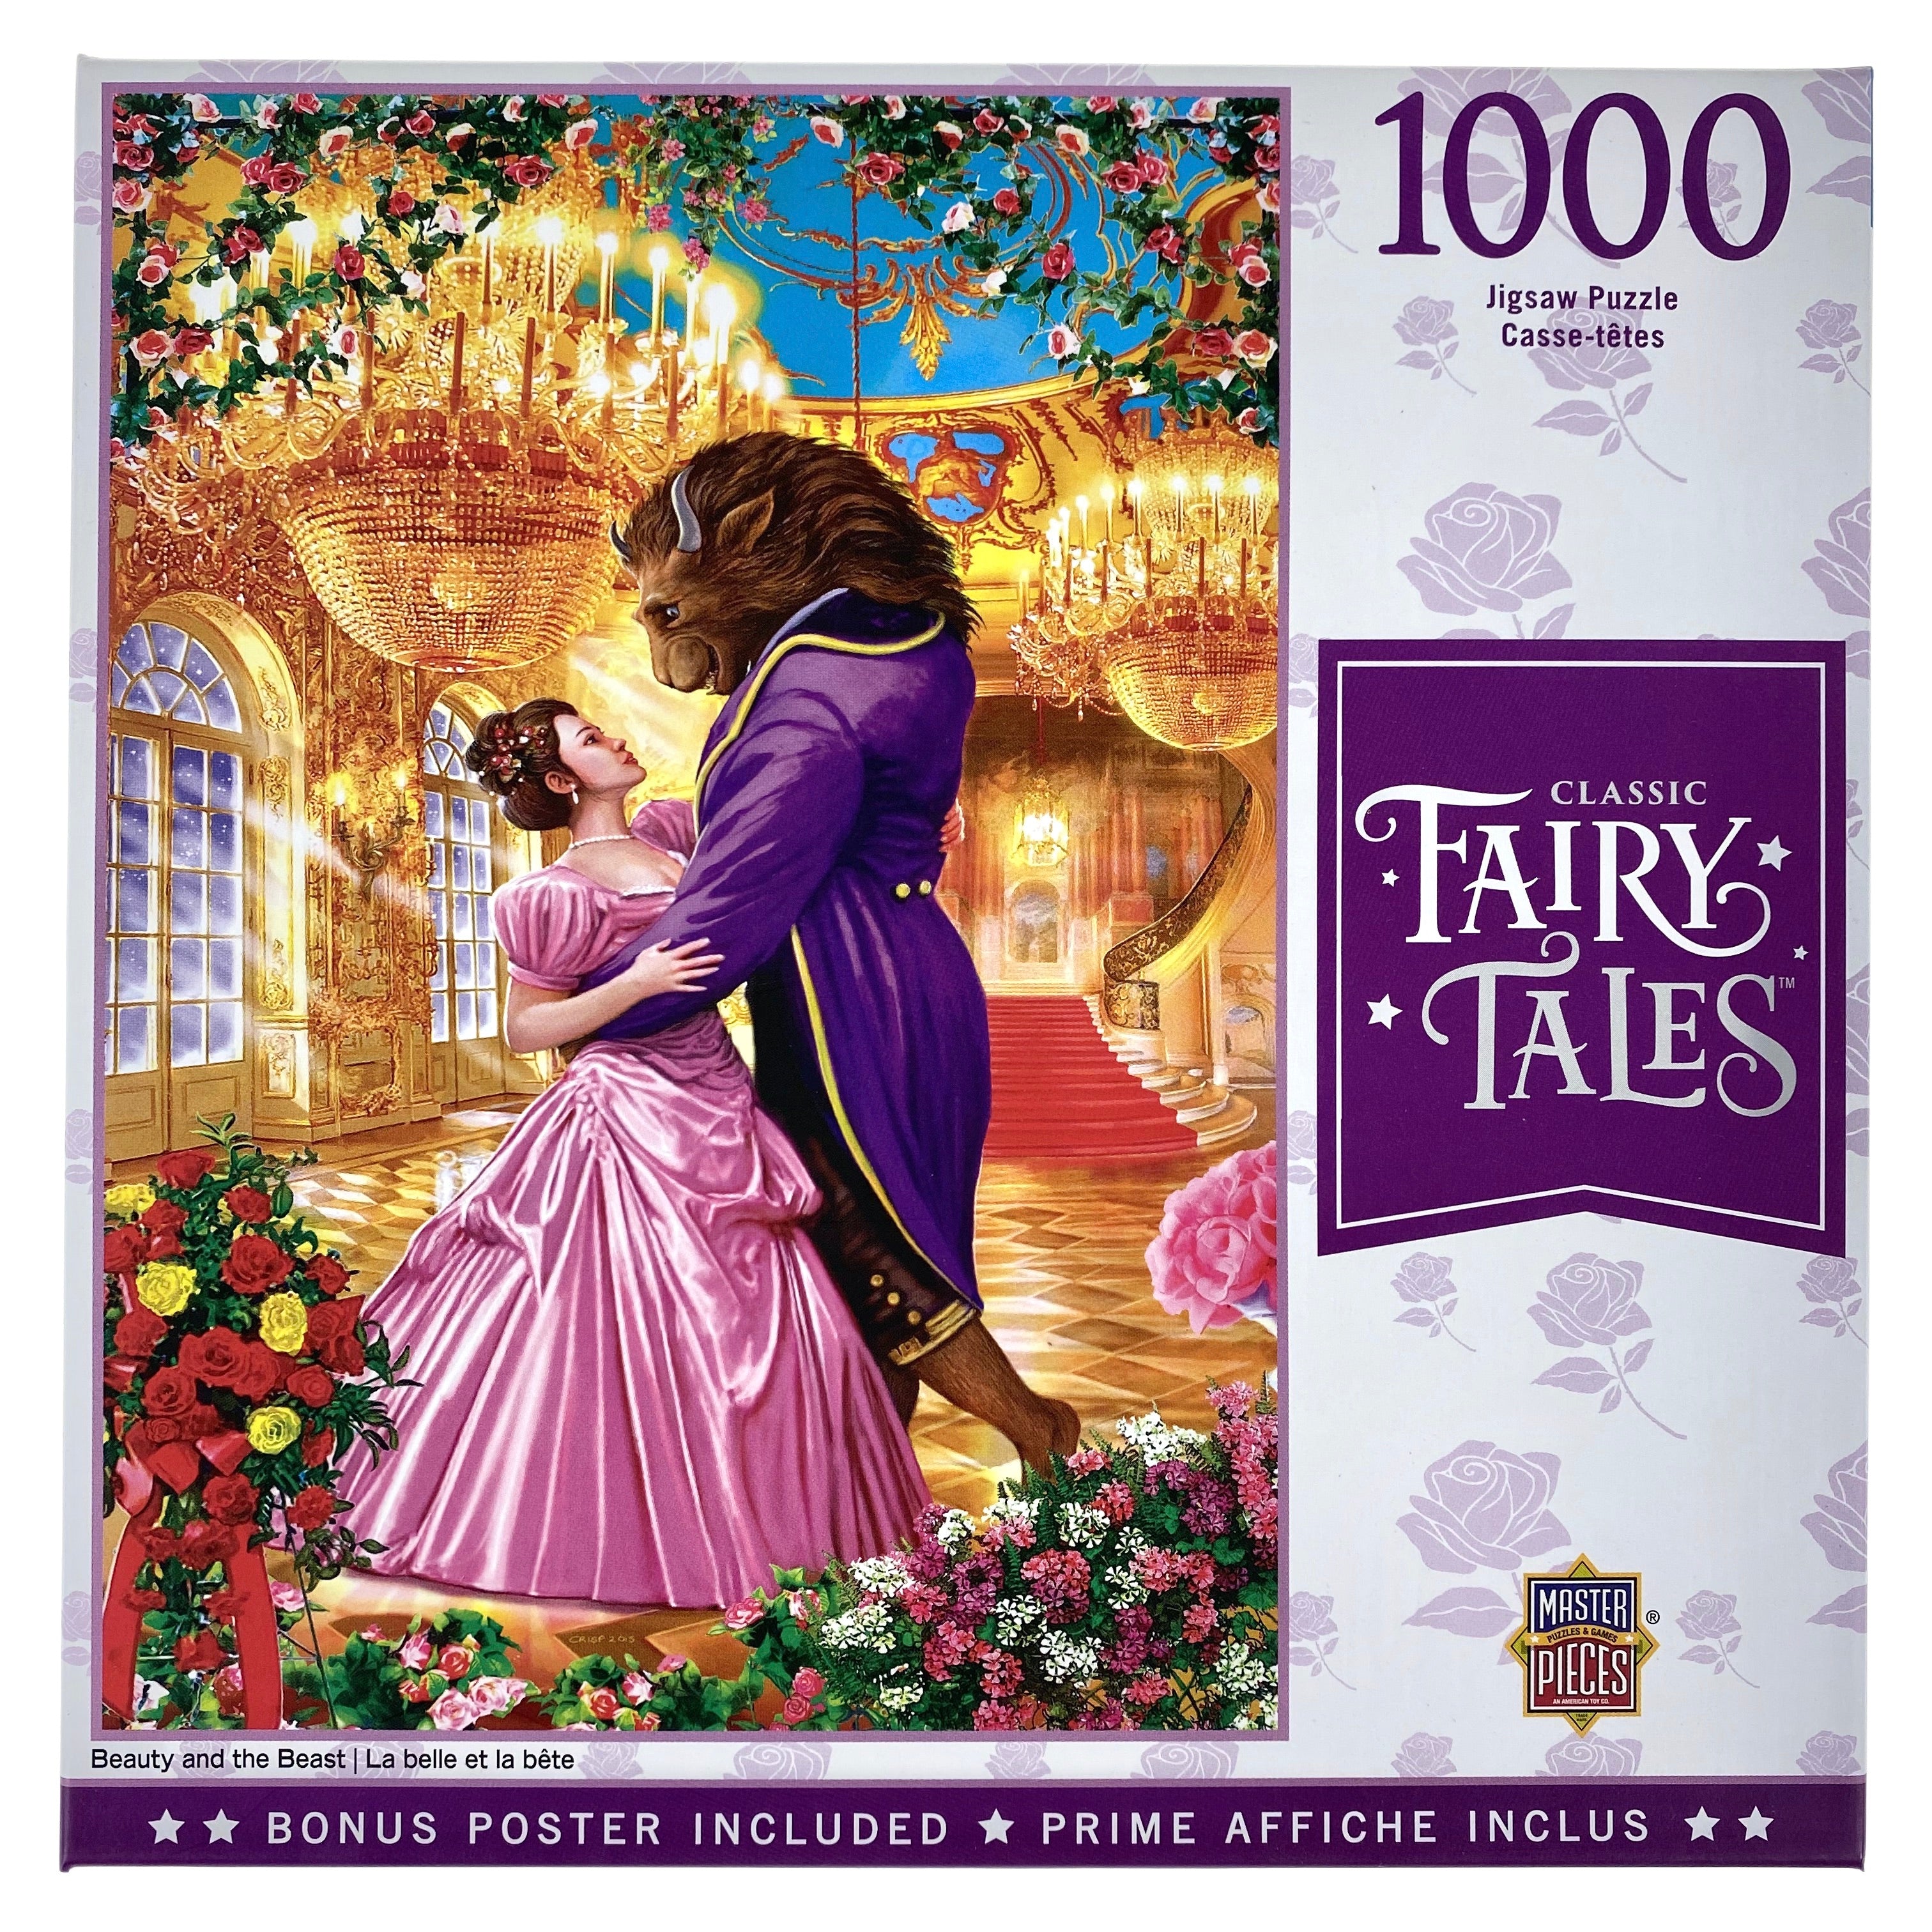 The Disney Family by Disney, 1000 Piece Puzzle – FairyPuzzled